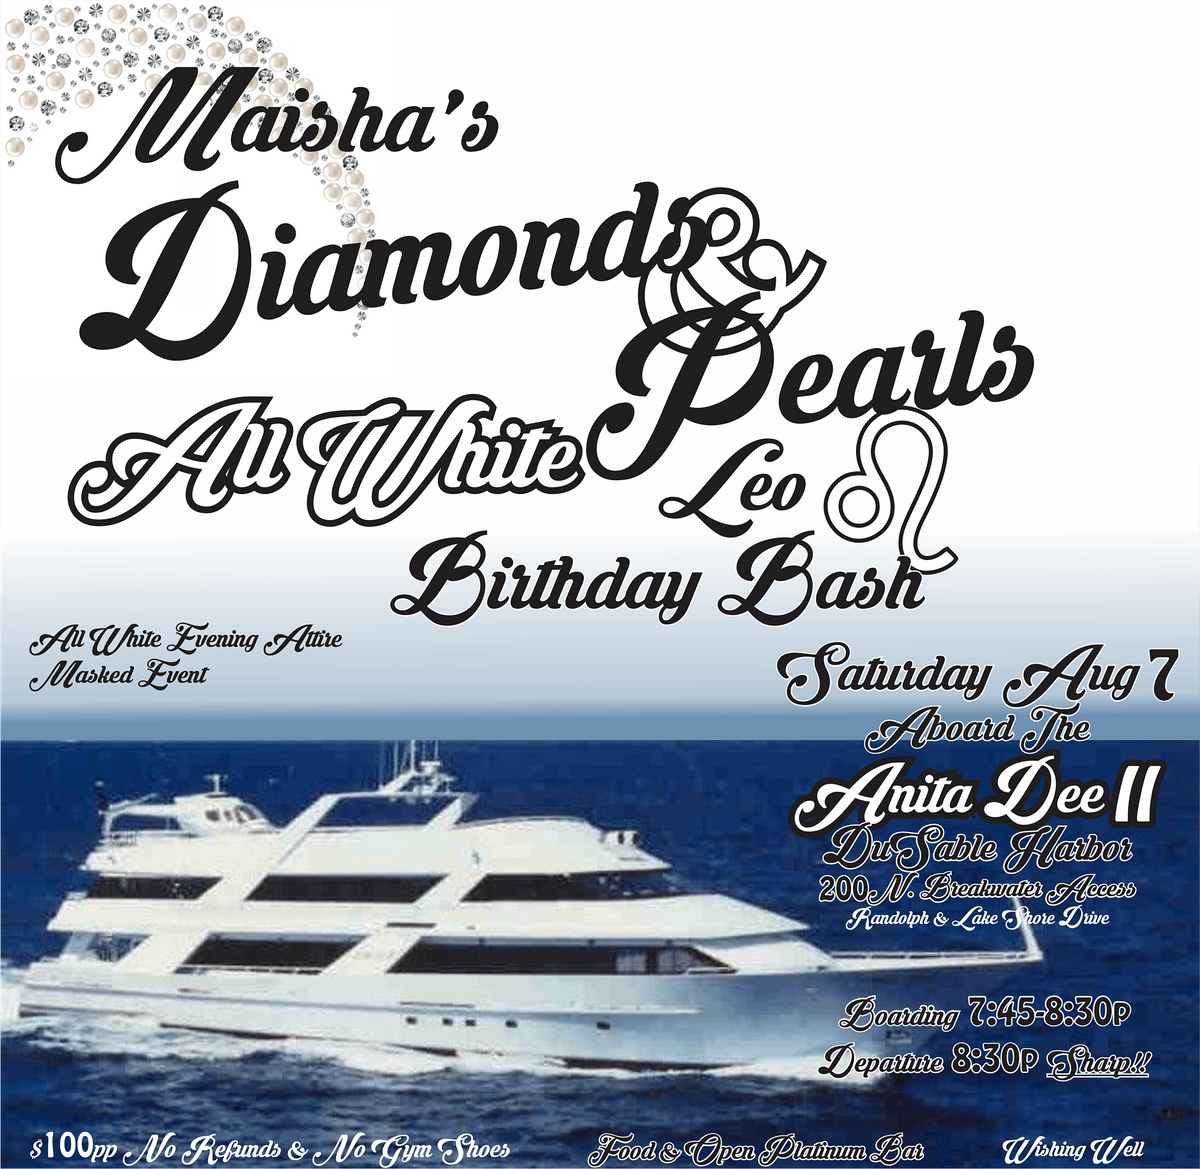 MASK!!All INCLUSIVE, All WHITE EVENING EVENT! ABOARD The Anita Dee II Yacht